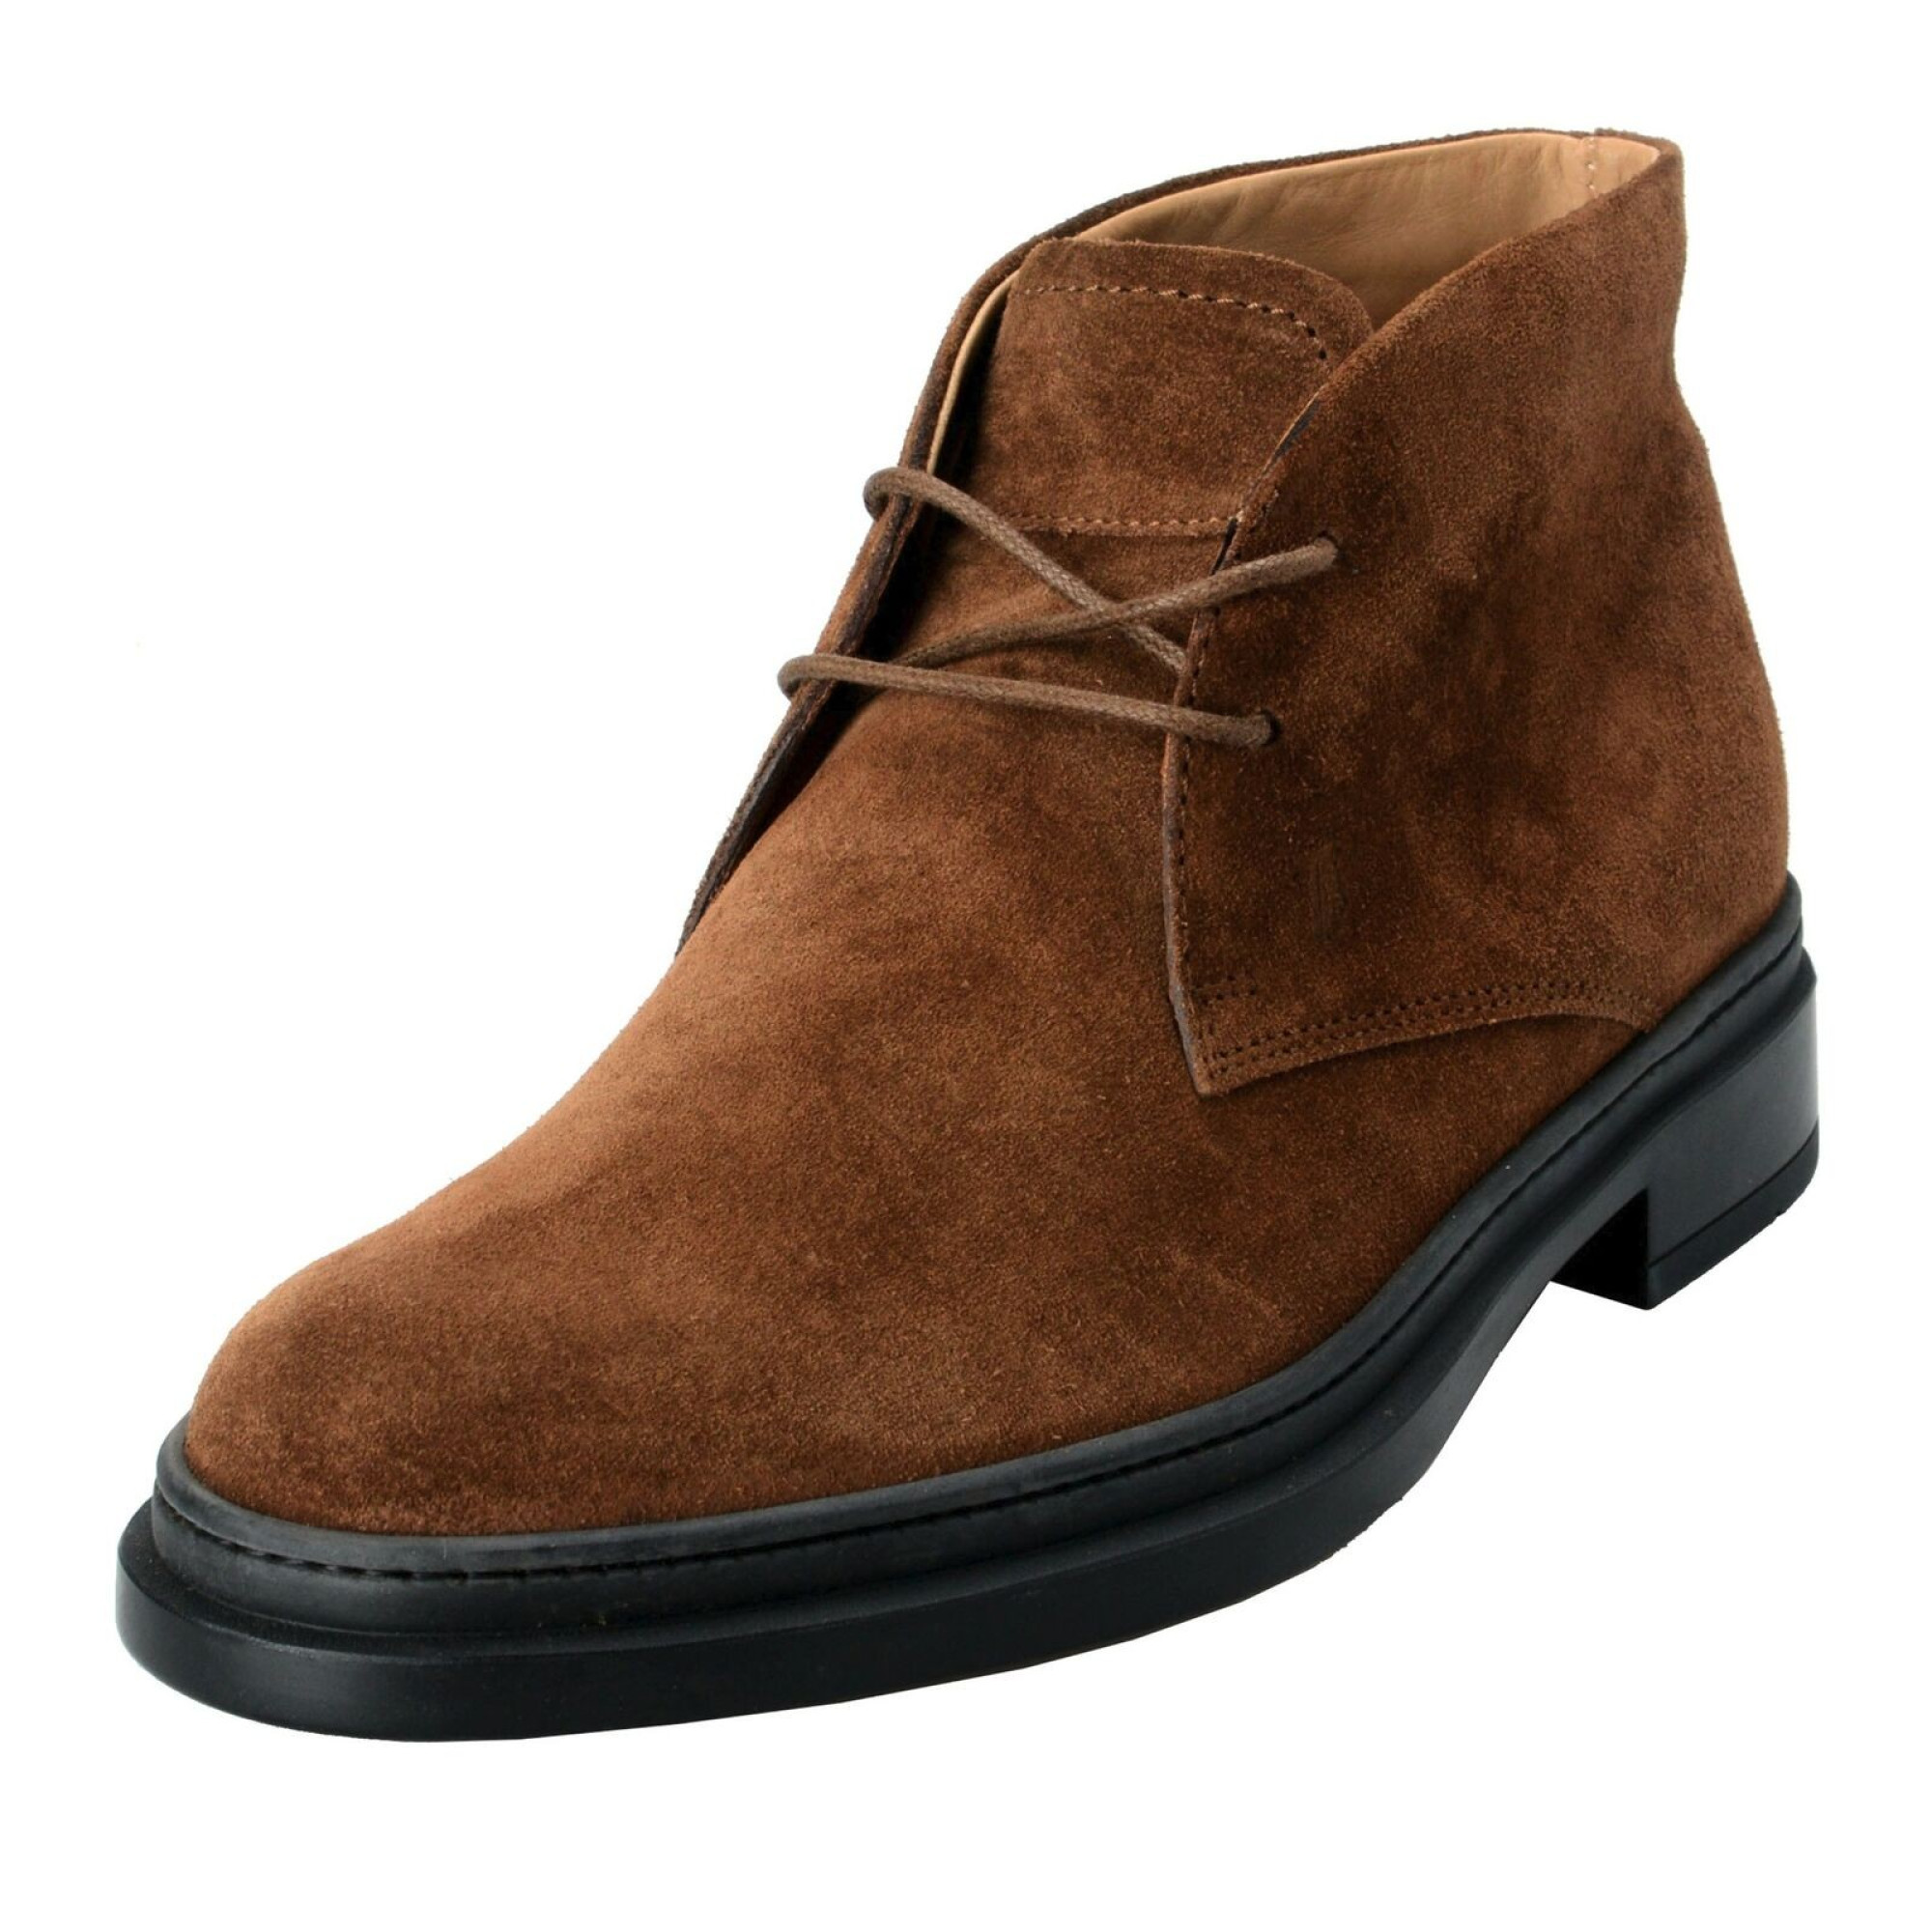 Tod's Men's Suede Brown Polacco Lace Up Ankle Boots Shoes